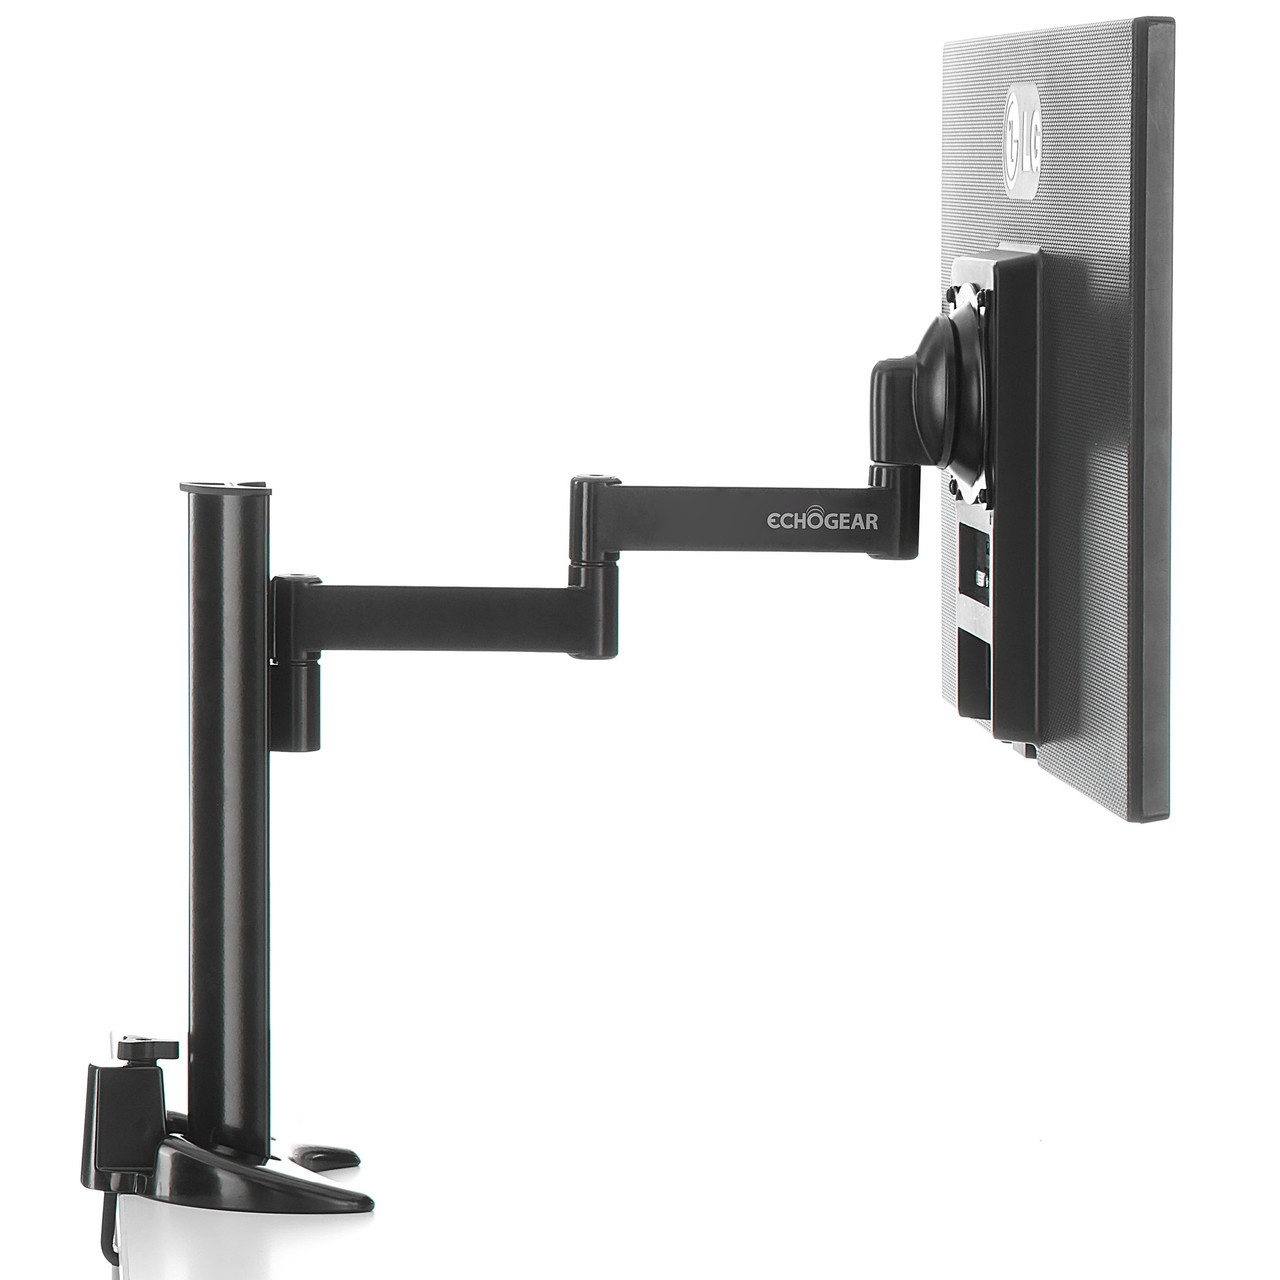 Echogear Single Monitor Desk Mount For Ultra Wide Monitors Up To 34